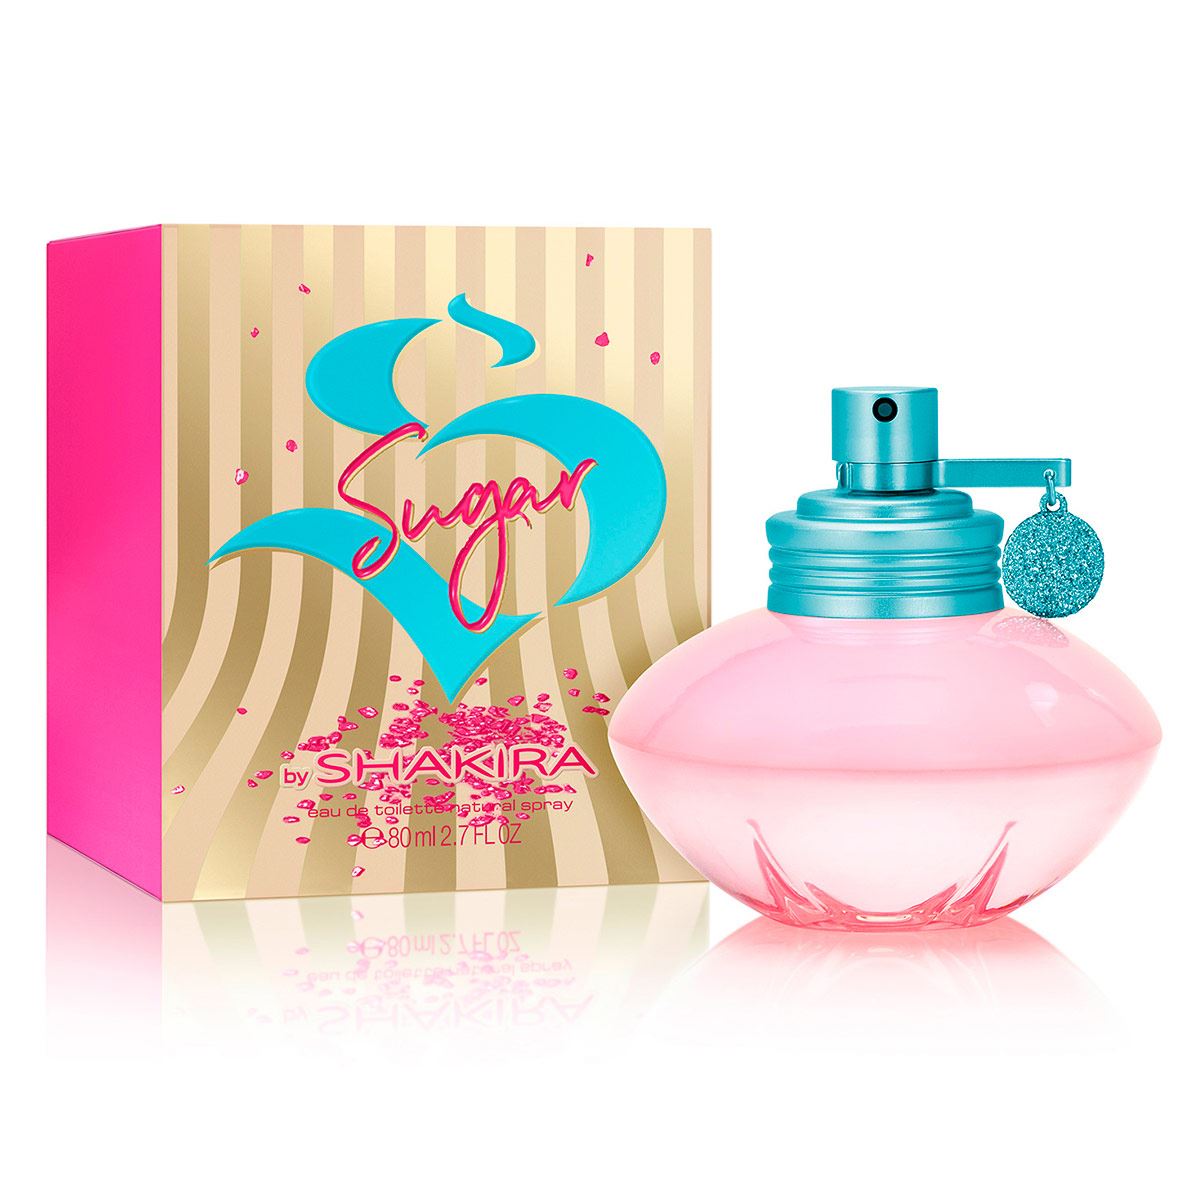 <meta charset="UTF-8">
<p data-mce-fragment="1">S Sugar by Shakira is a Floral fragrance for women. This is a new fragrance. S Sugar was launched in 2020. Top notes are Strawberry, Cherry, Raspberry and Bergamot; middle notes are iris, Hawthorn and Rose; base notes are Candied Almond, Vanilla and Musk.</p>